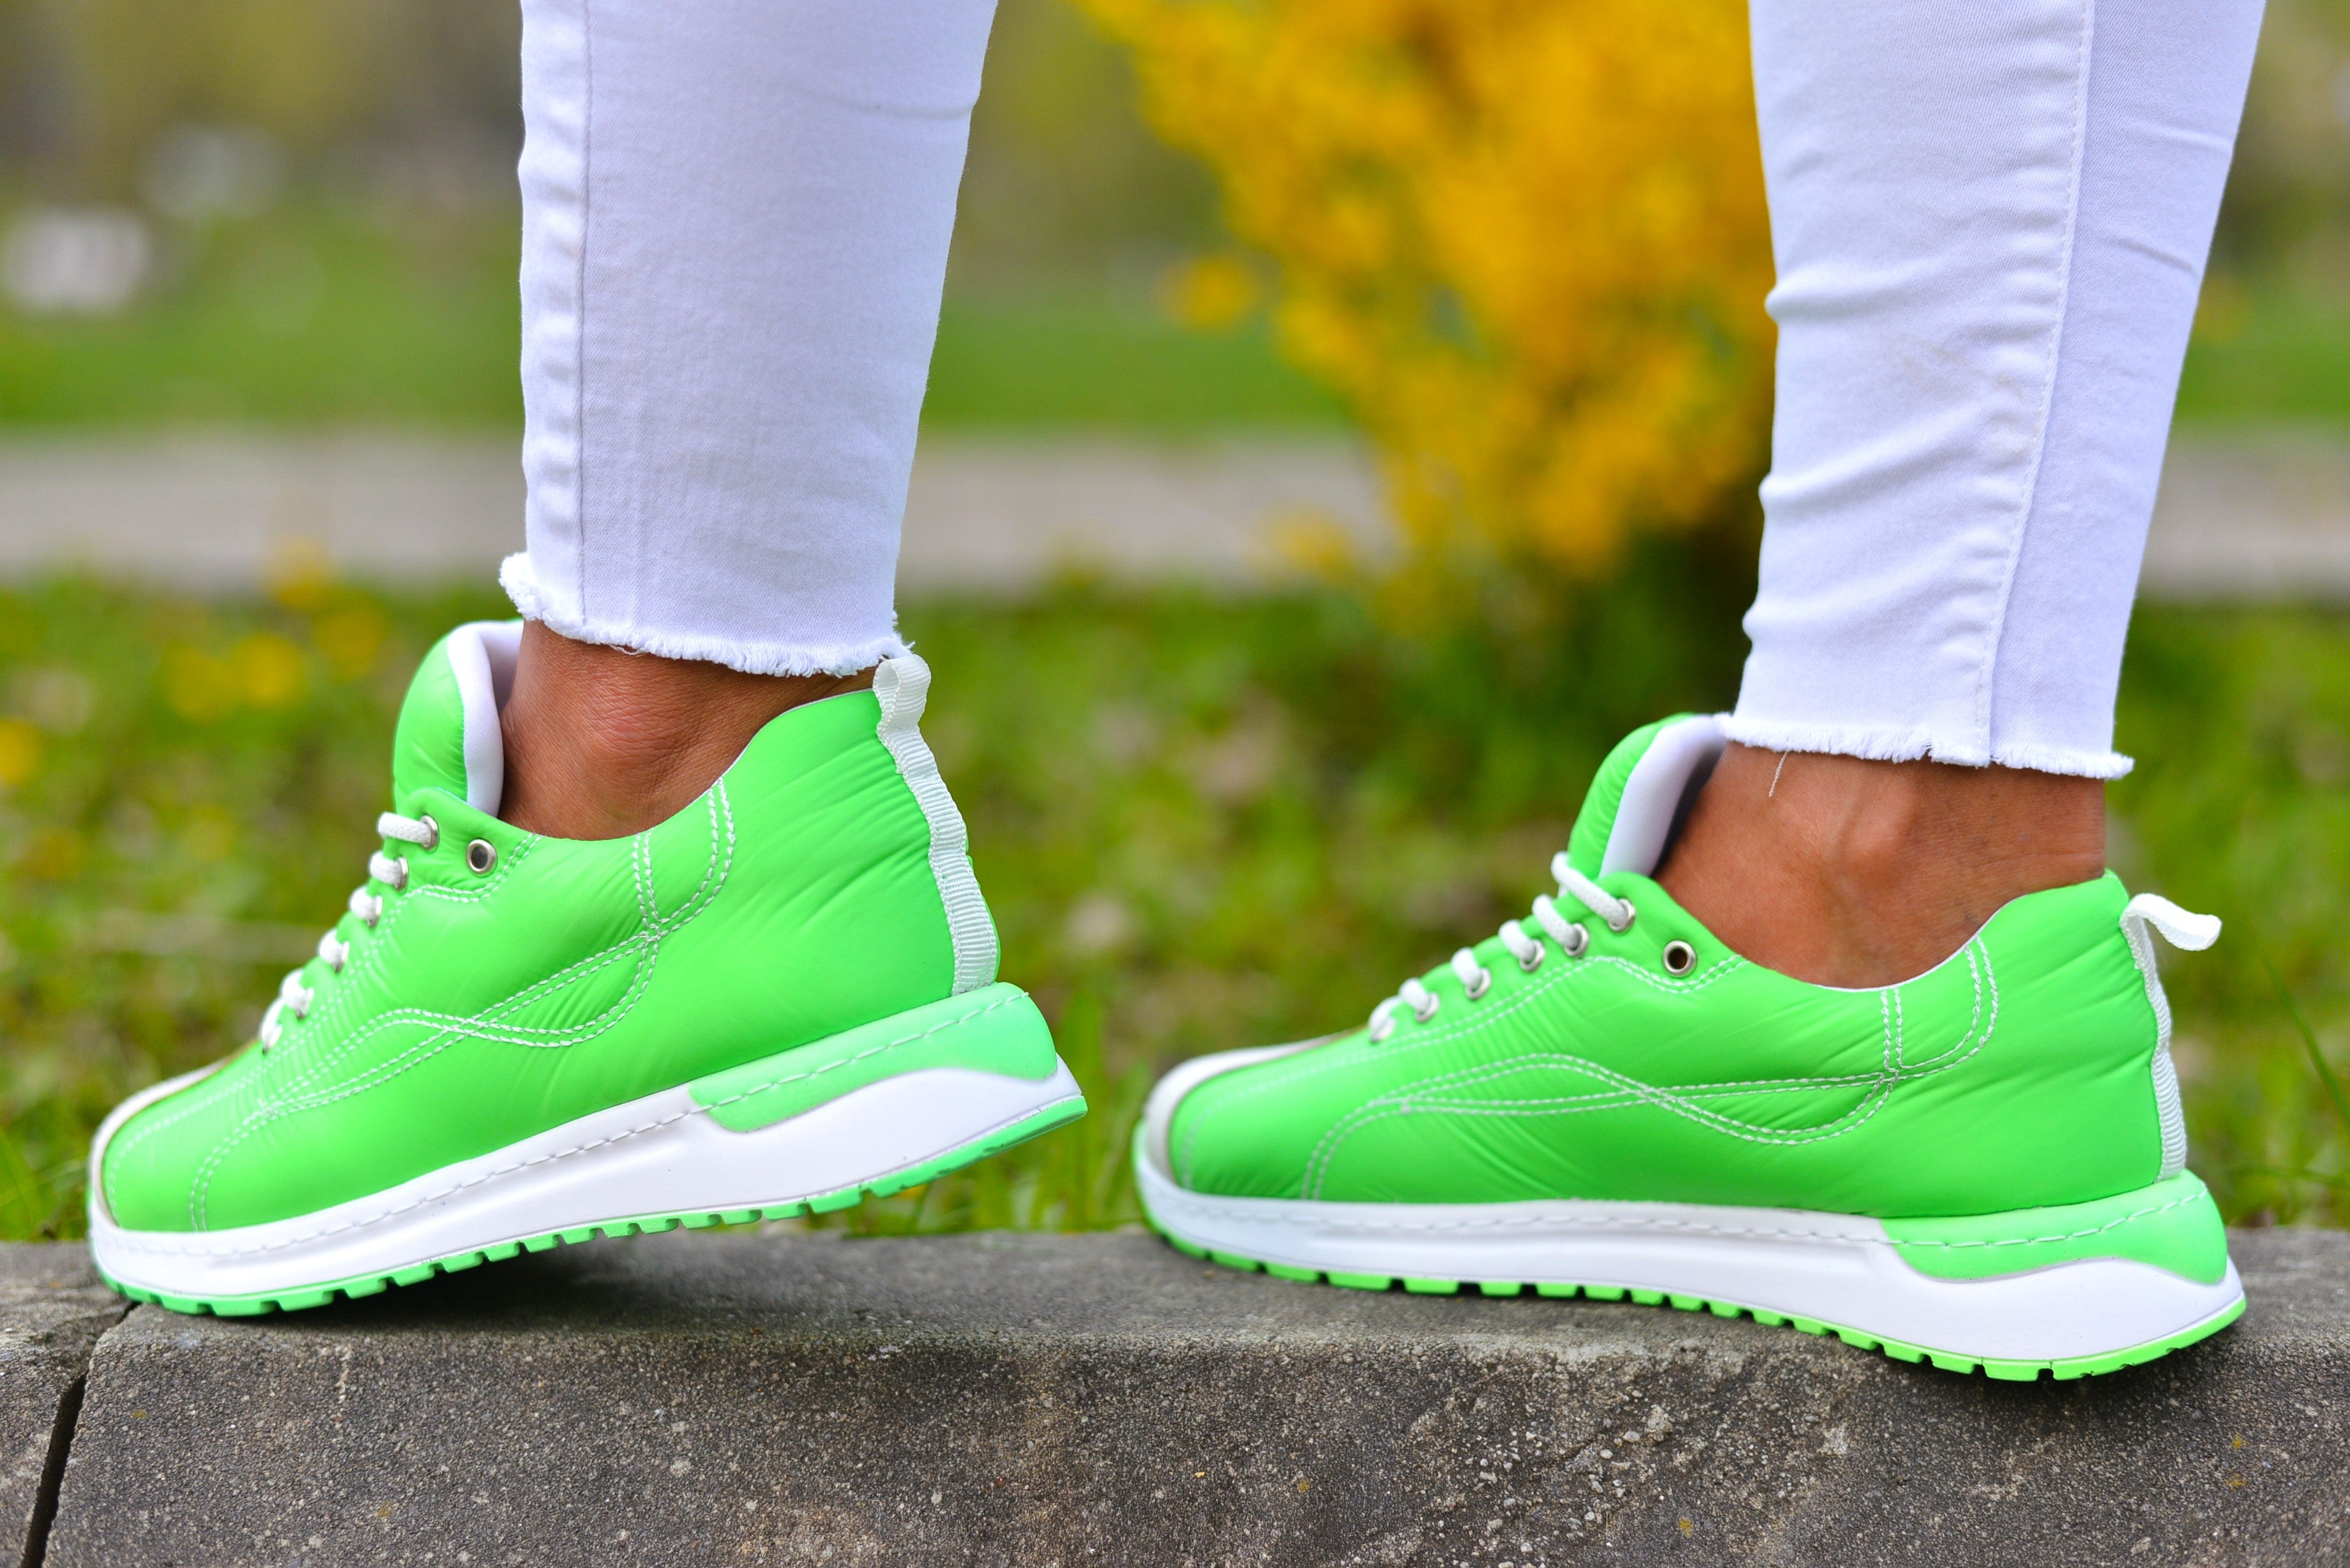 Women's Sneakers Green Neon Verona  Made of Textile Material